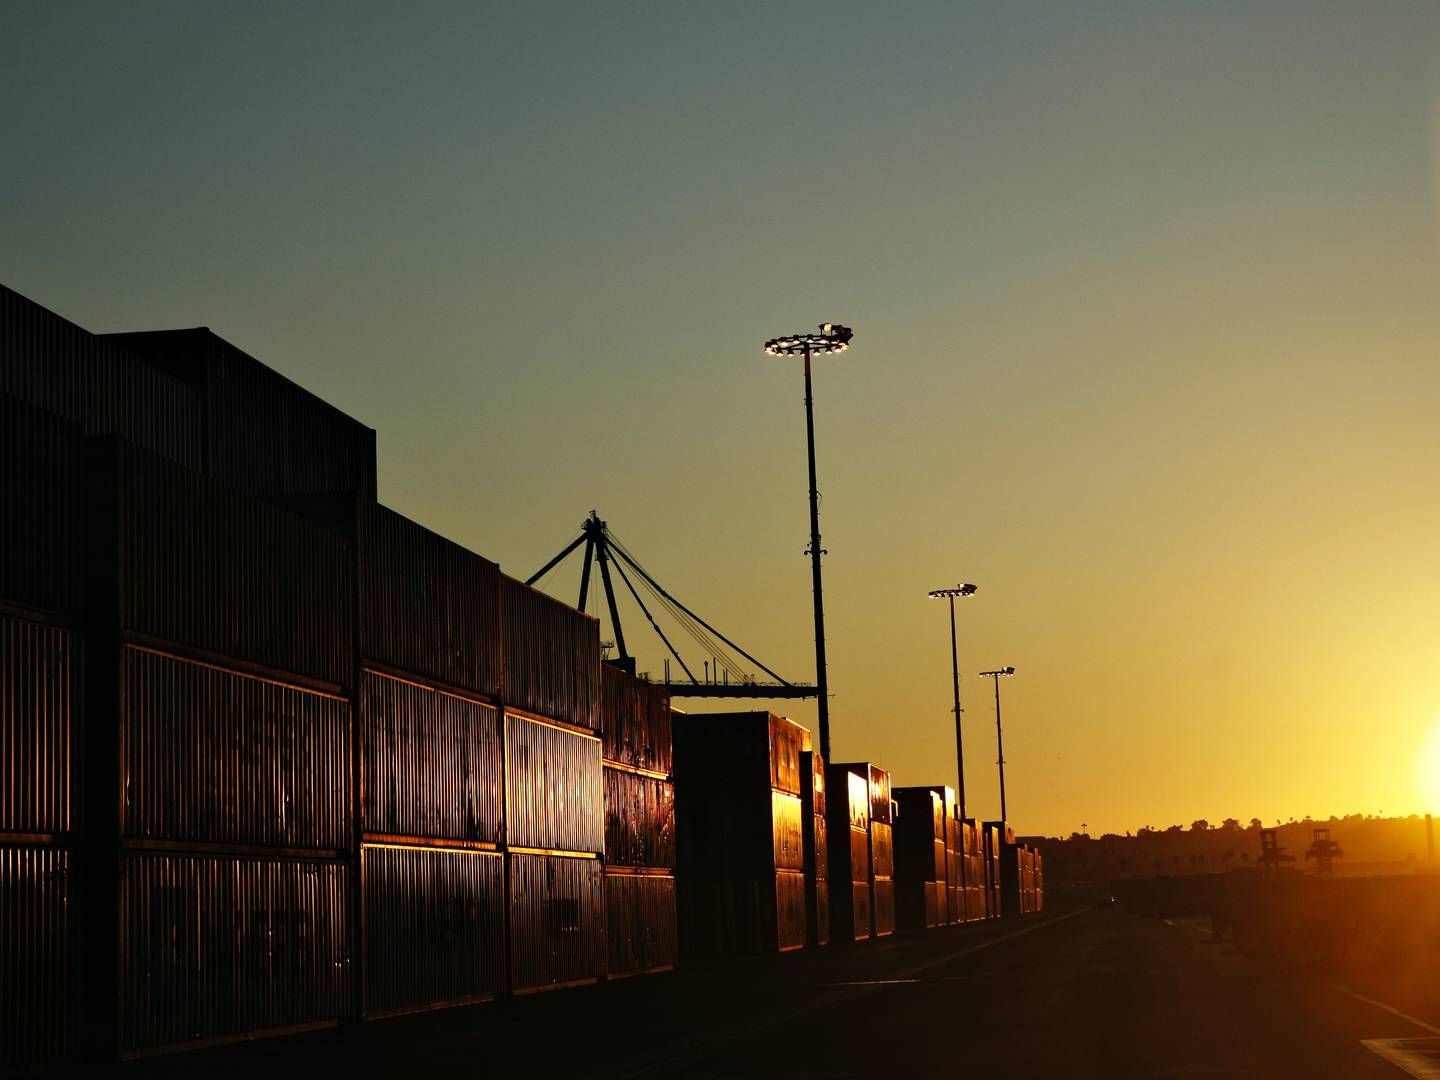 Maersk'ss container terminal in Los Angeles | Photo: Stine Bidstrup/ERH